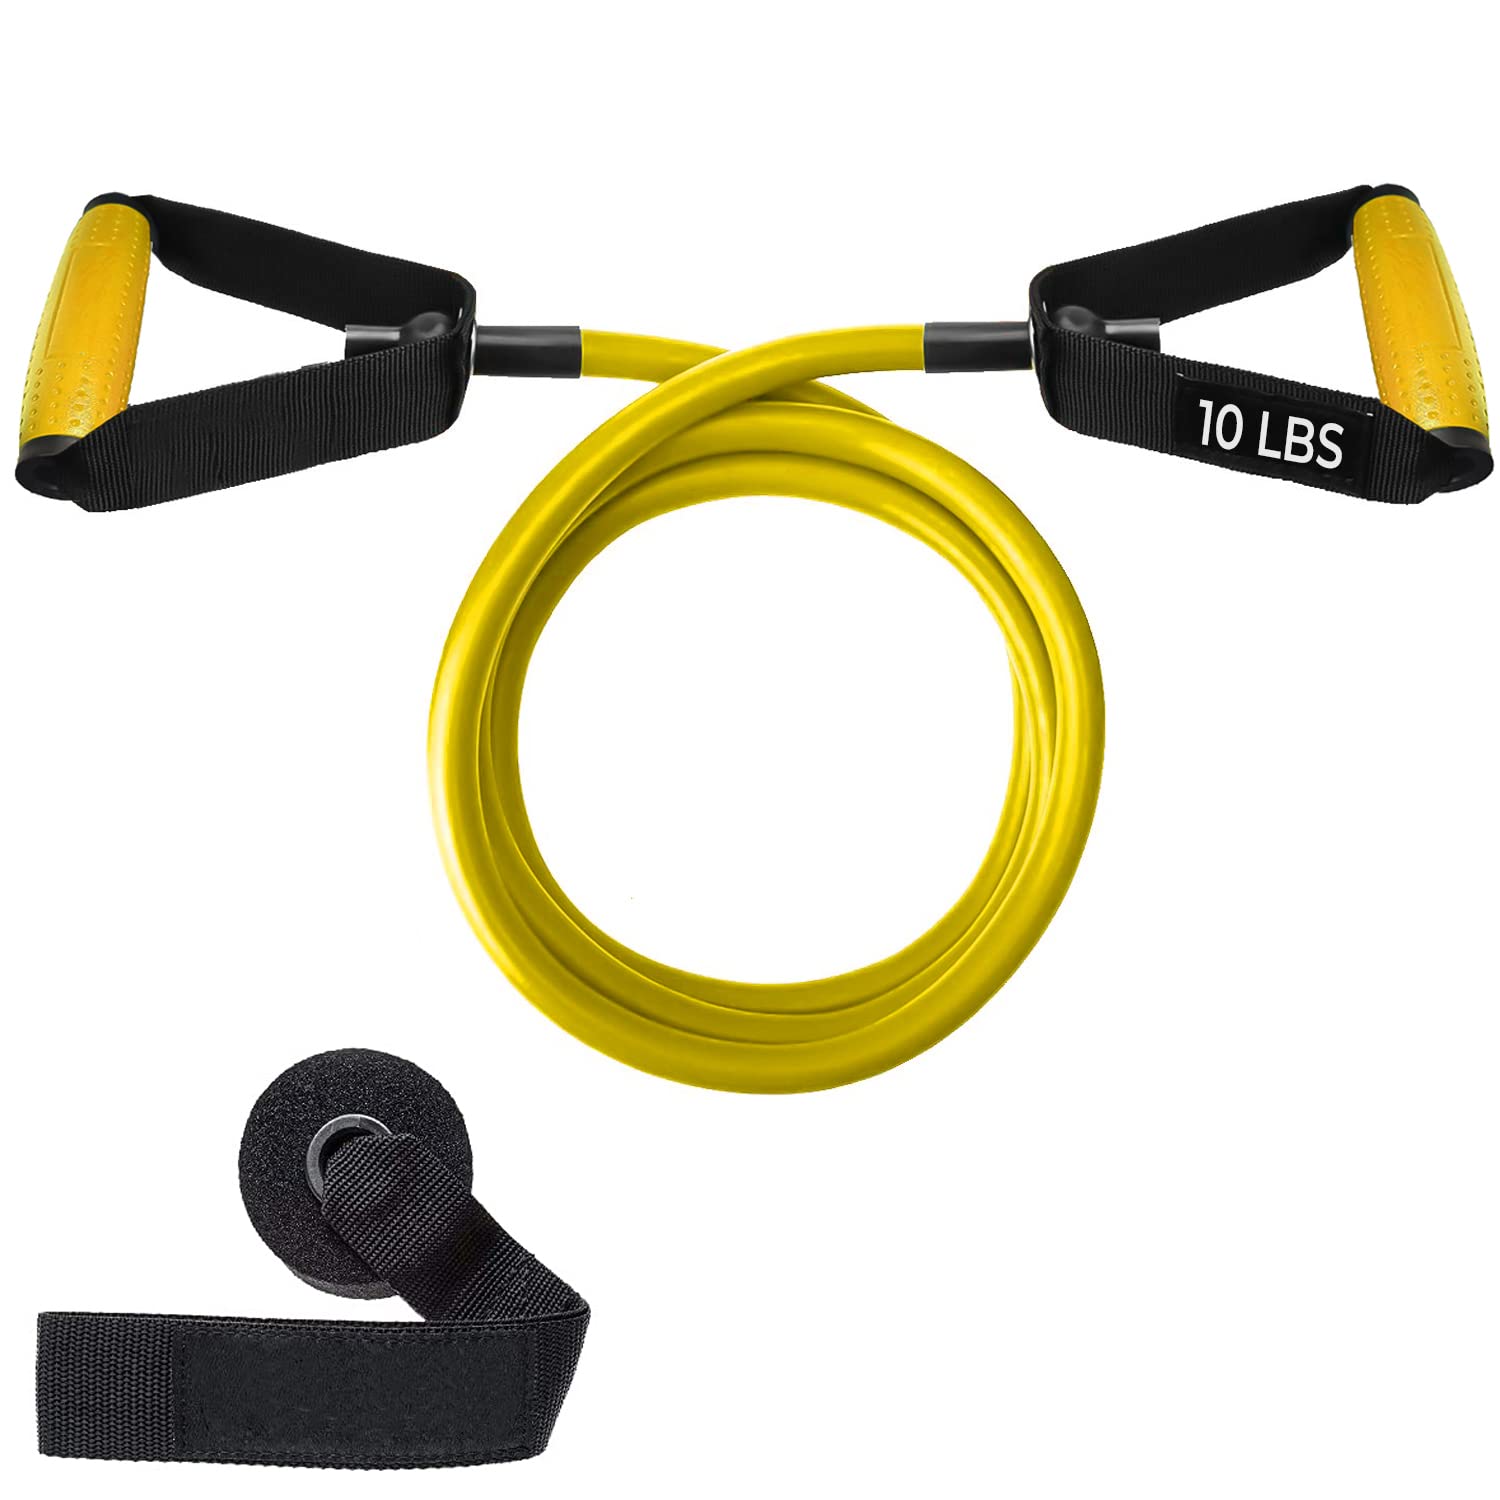 Strauss Single Resistance Tube with PVC Handles, Door Knob & Carry Bag, 4 Kg, (Yellow)